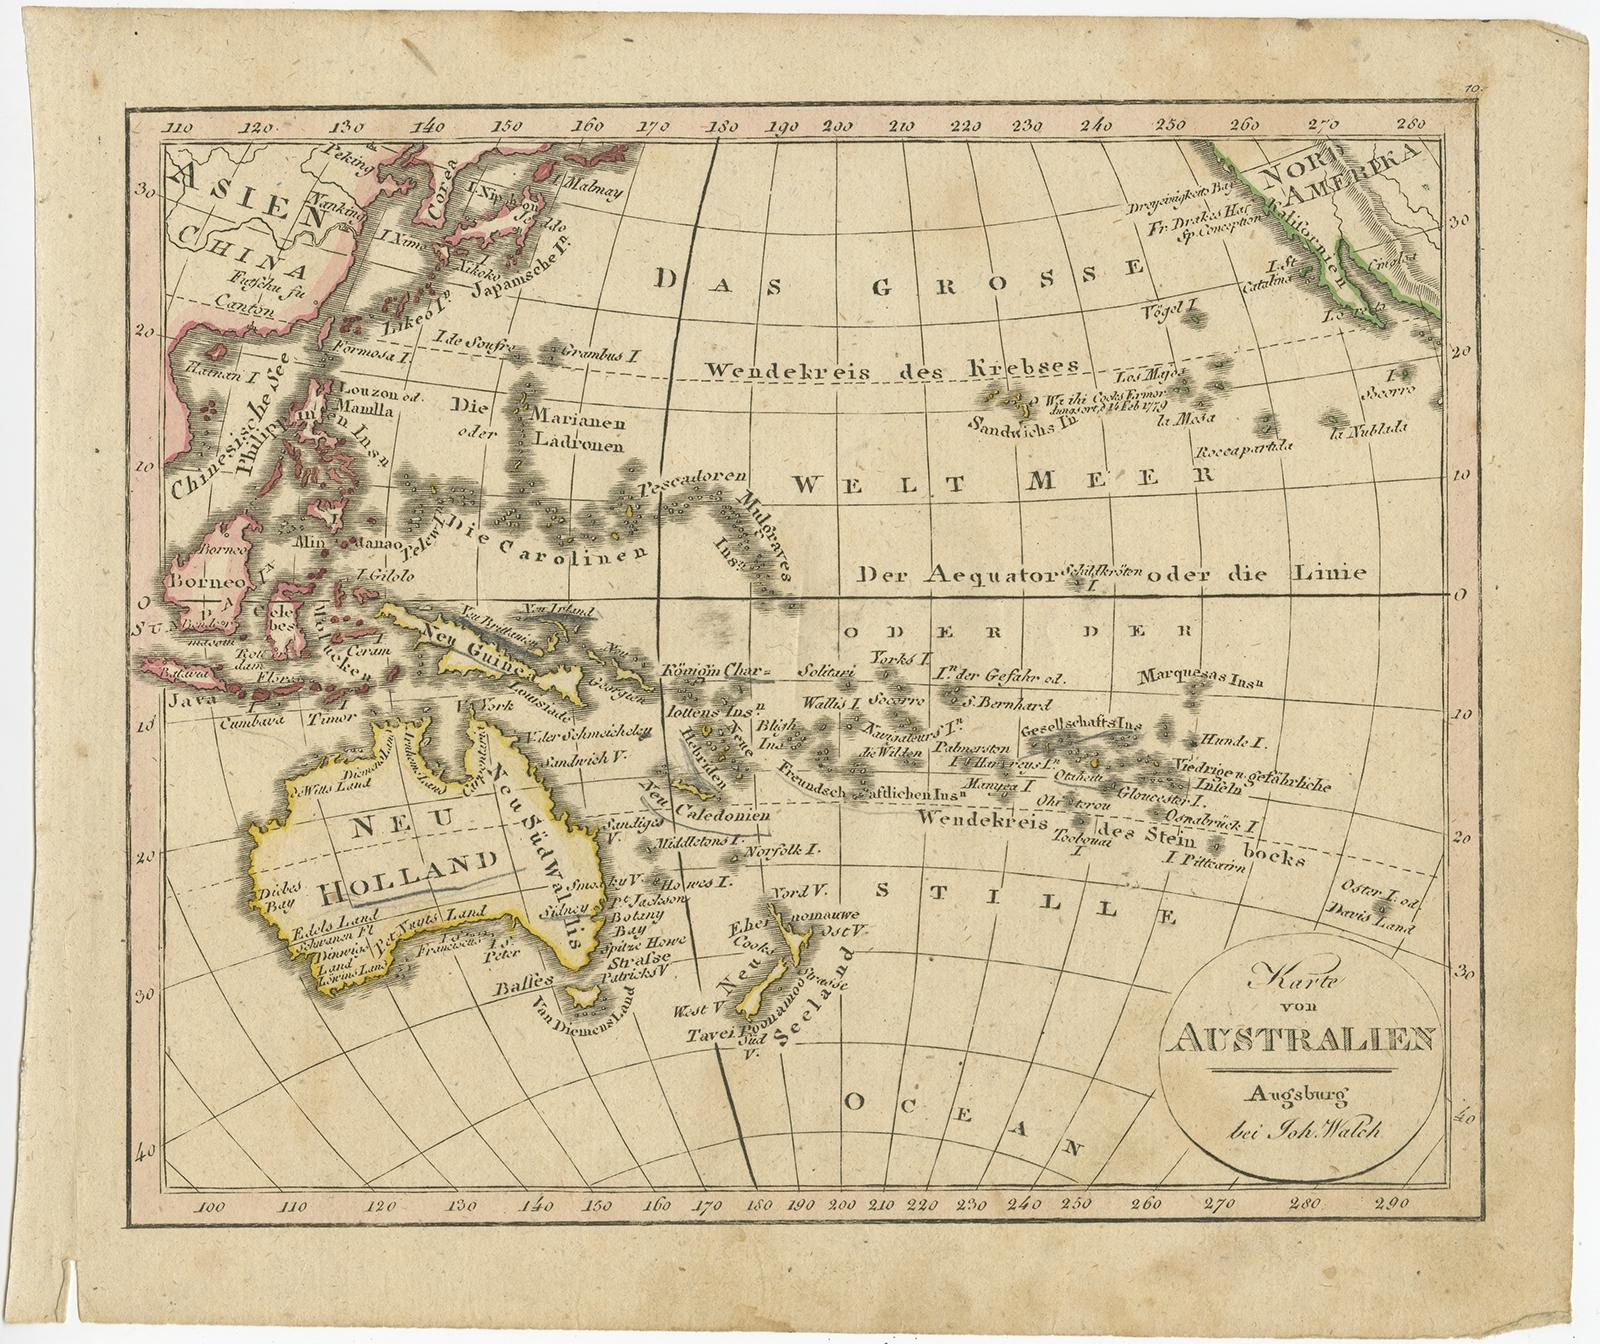 Antique map of Australia titled 'Karte von Australien'. Old map of Australia and New Zealand. Published in Walch's 'Neuester Schul-Atlas'. 

Artists and Engravers: Johann, or Johannes, Walch (1757-1816) was a painter and engraver. He was